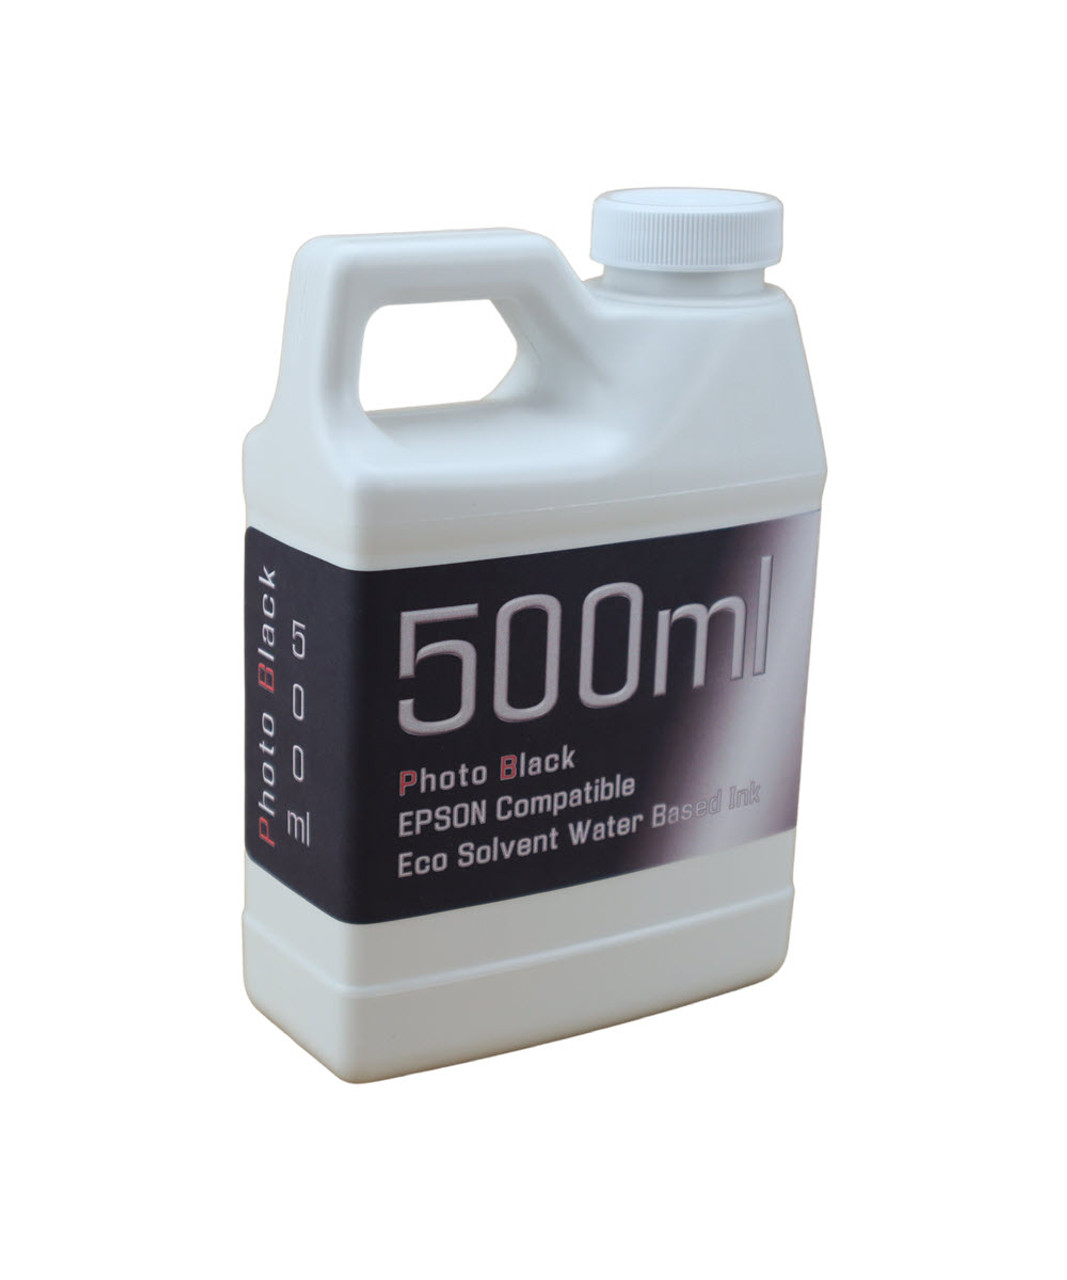 Photo Black Water Based Eco Solvent Ink 500ml Bottle for Epson SureColor T3270 T5270 T7270 Printers